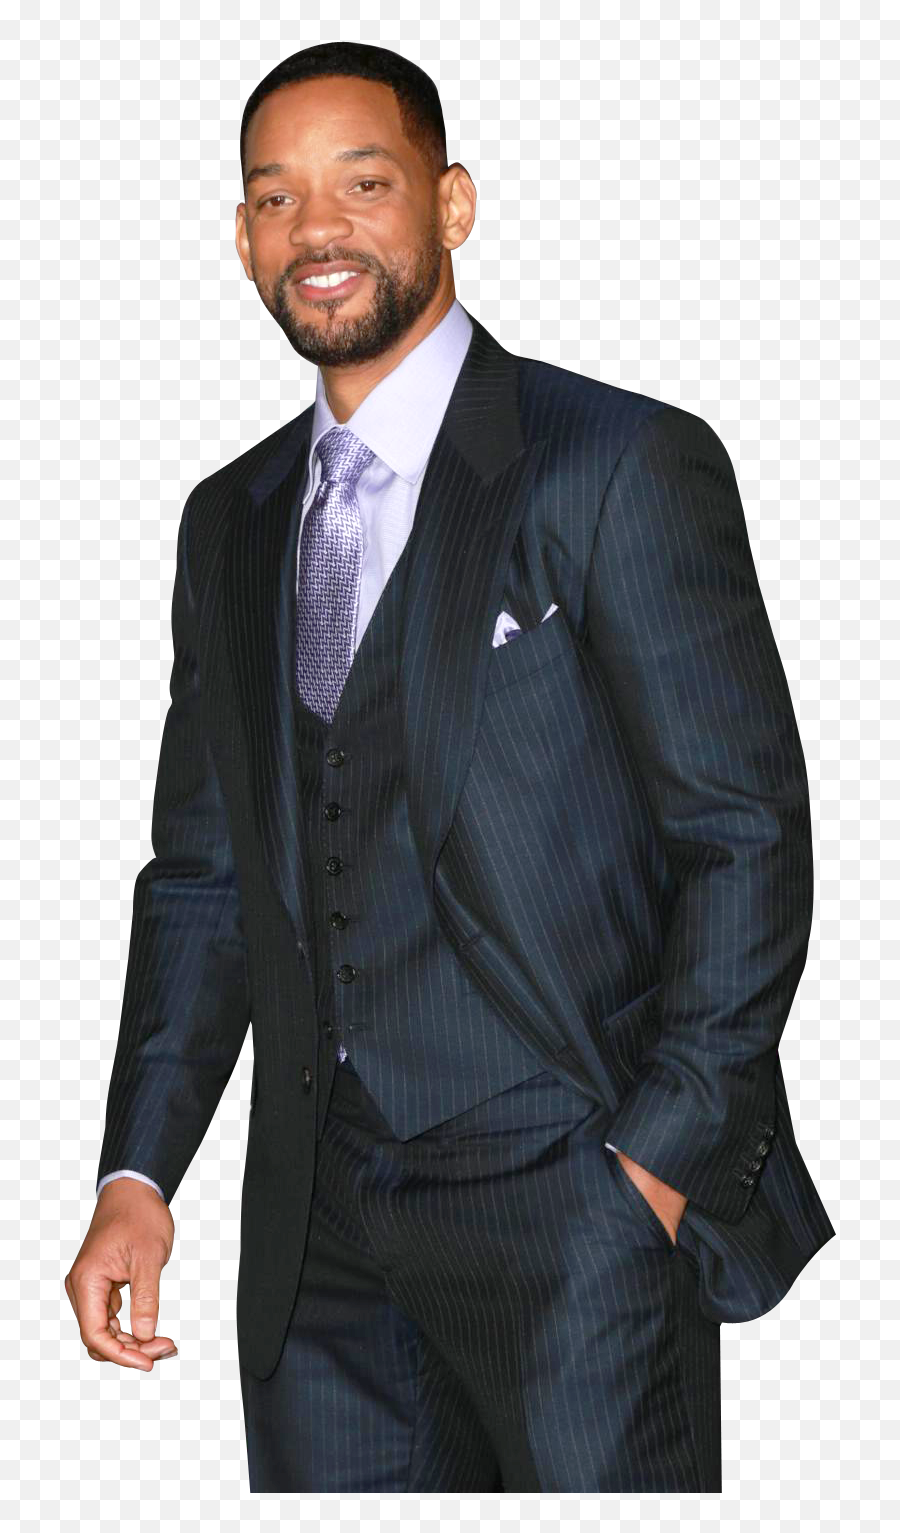 Png Transparent Will Smith - Will Smith In A Suit,Will Smith Transparent